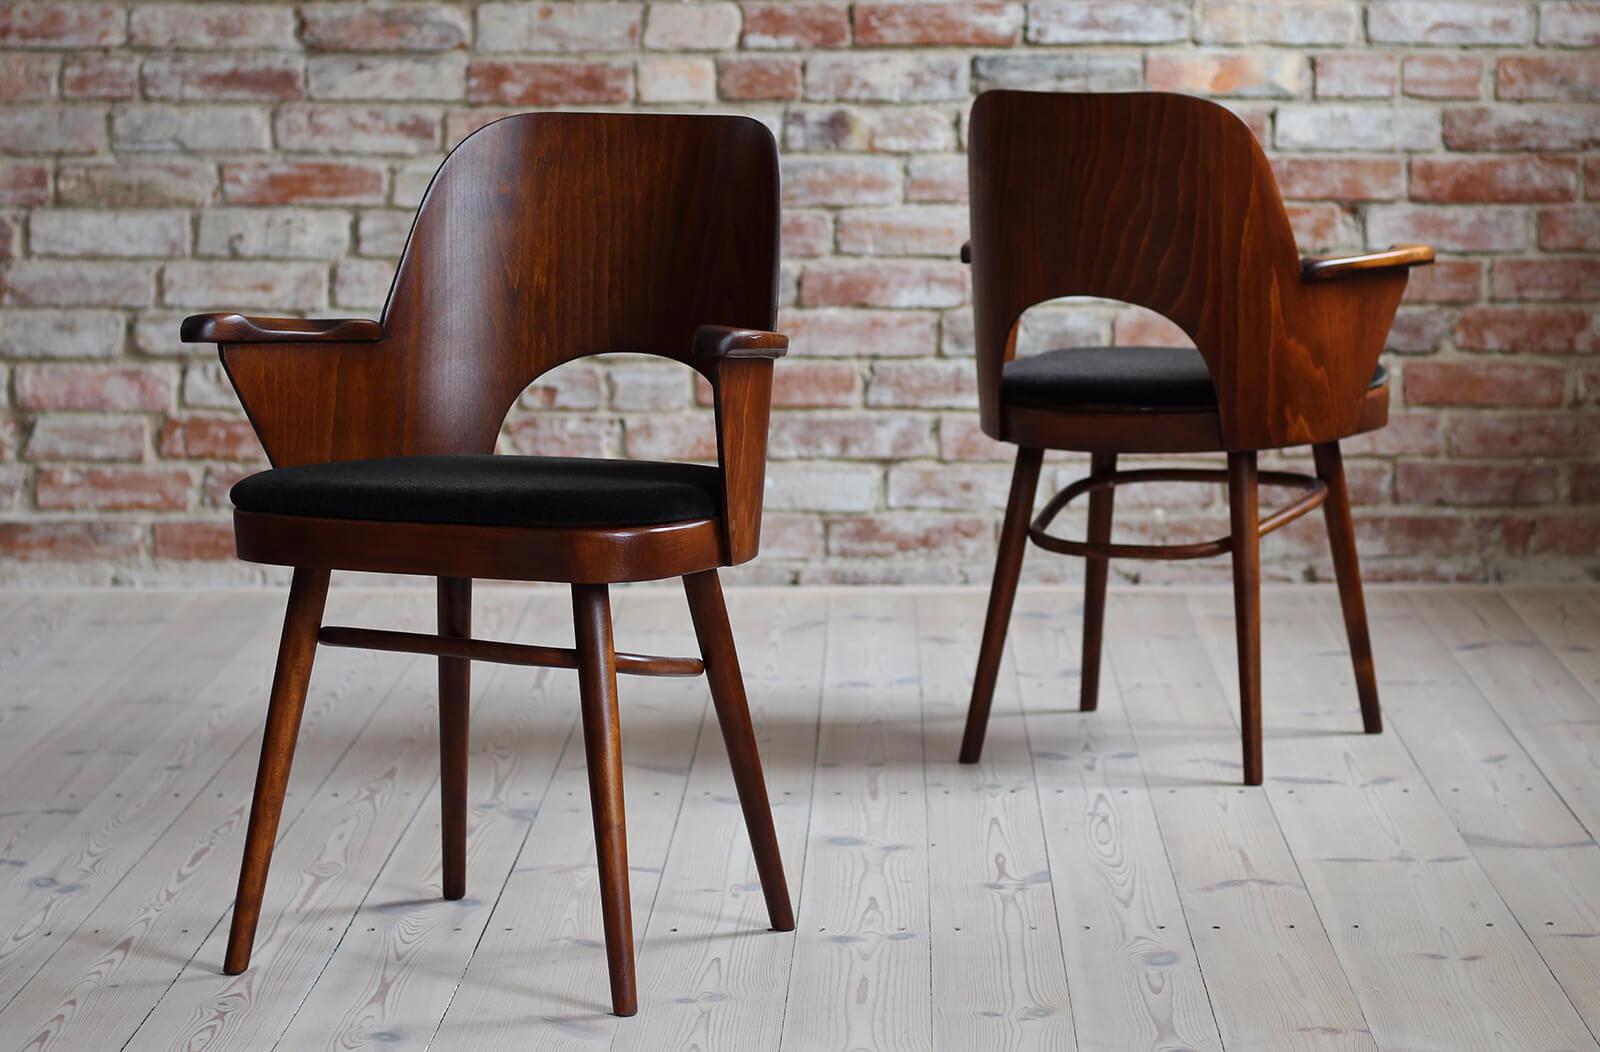 Lacquered Set of 4 Midcentury Dining Chairs by L. Hofmann, Reupholstered in Kvadrat Fabric